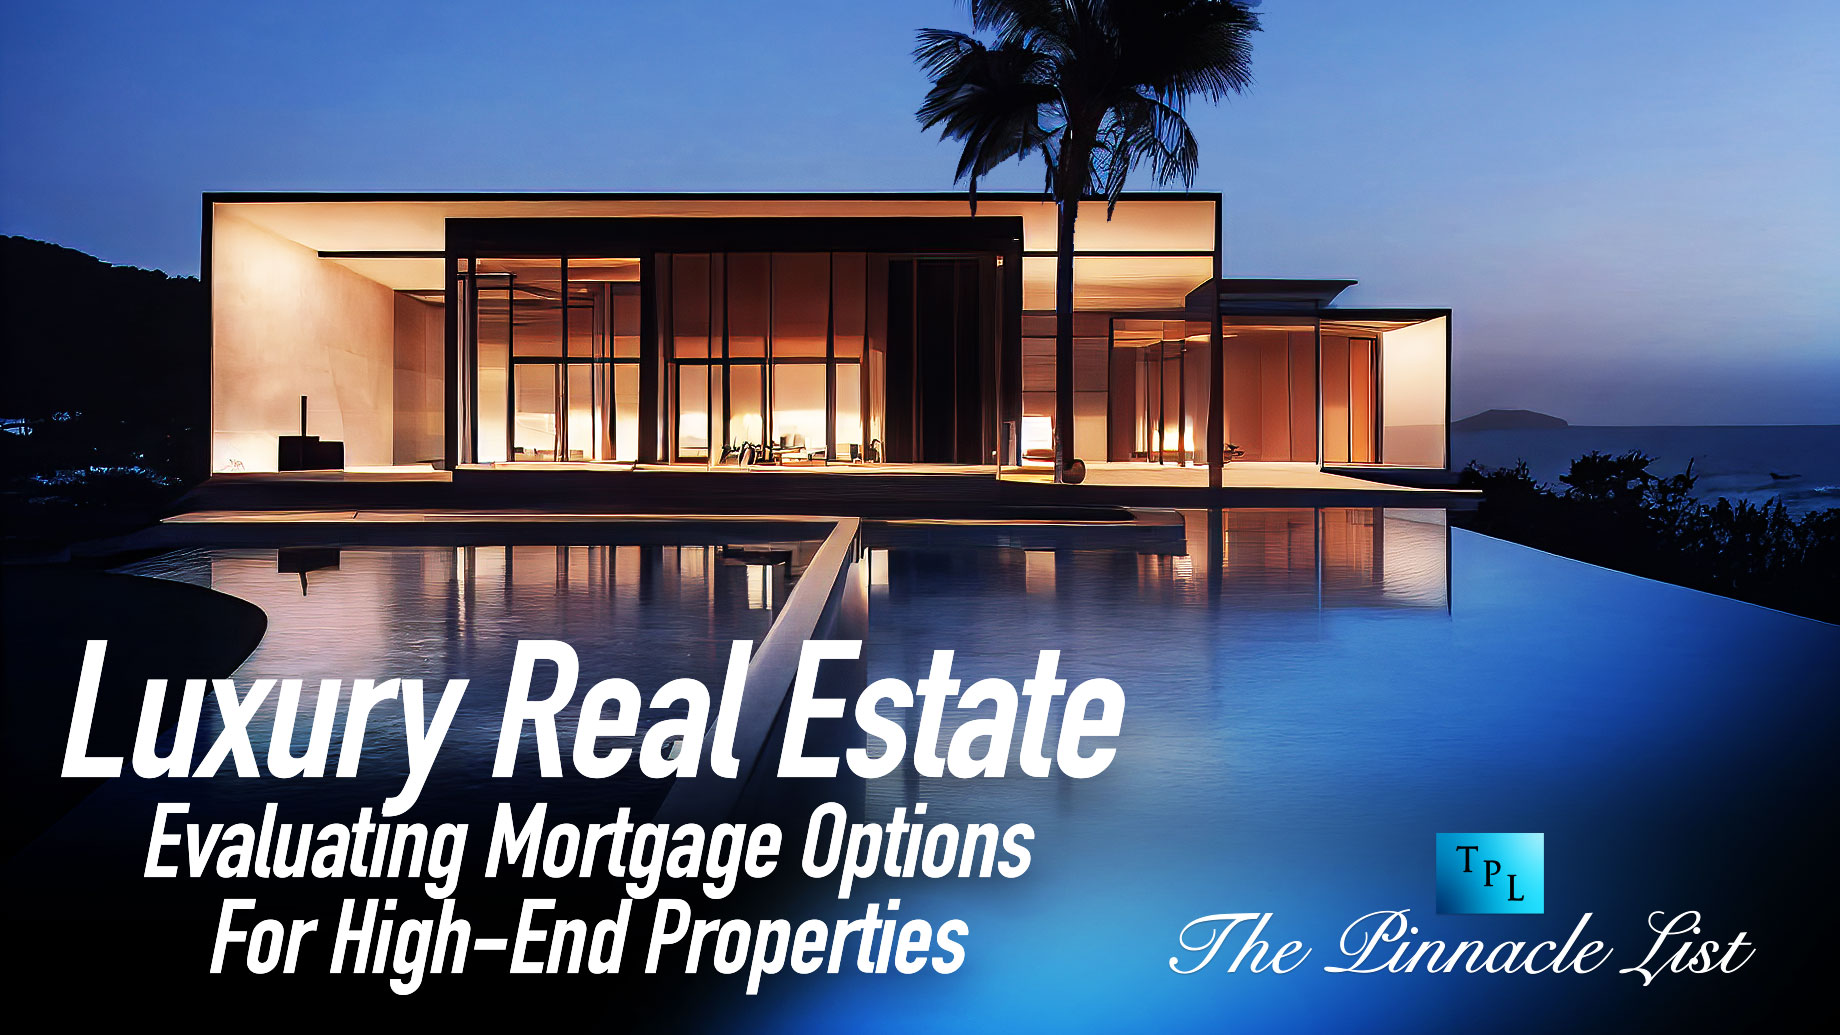 Luxury Real Estate: Evaluating Mortgage Options For High-End Properties